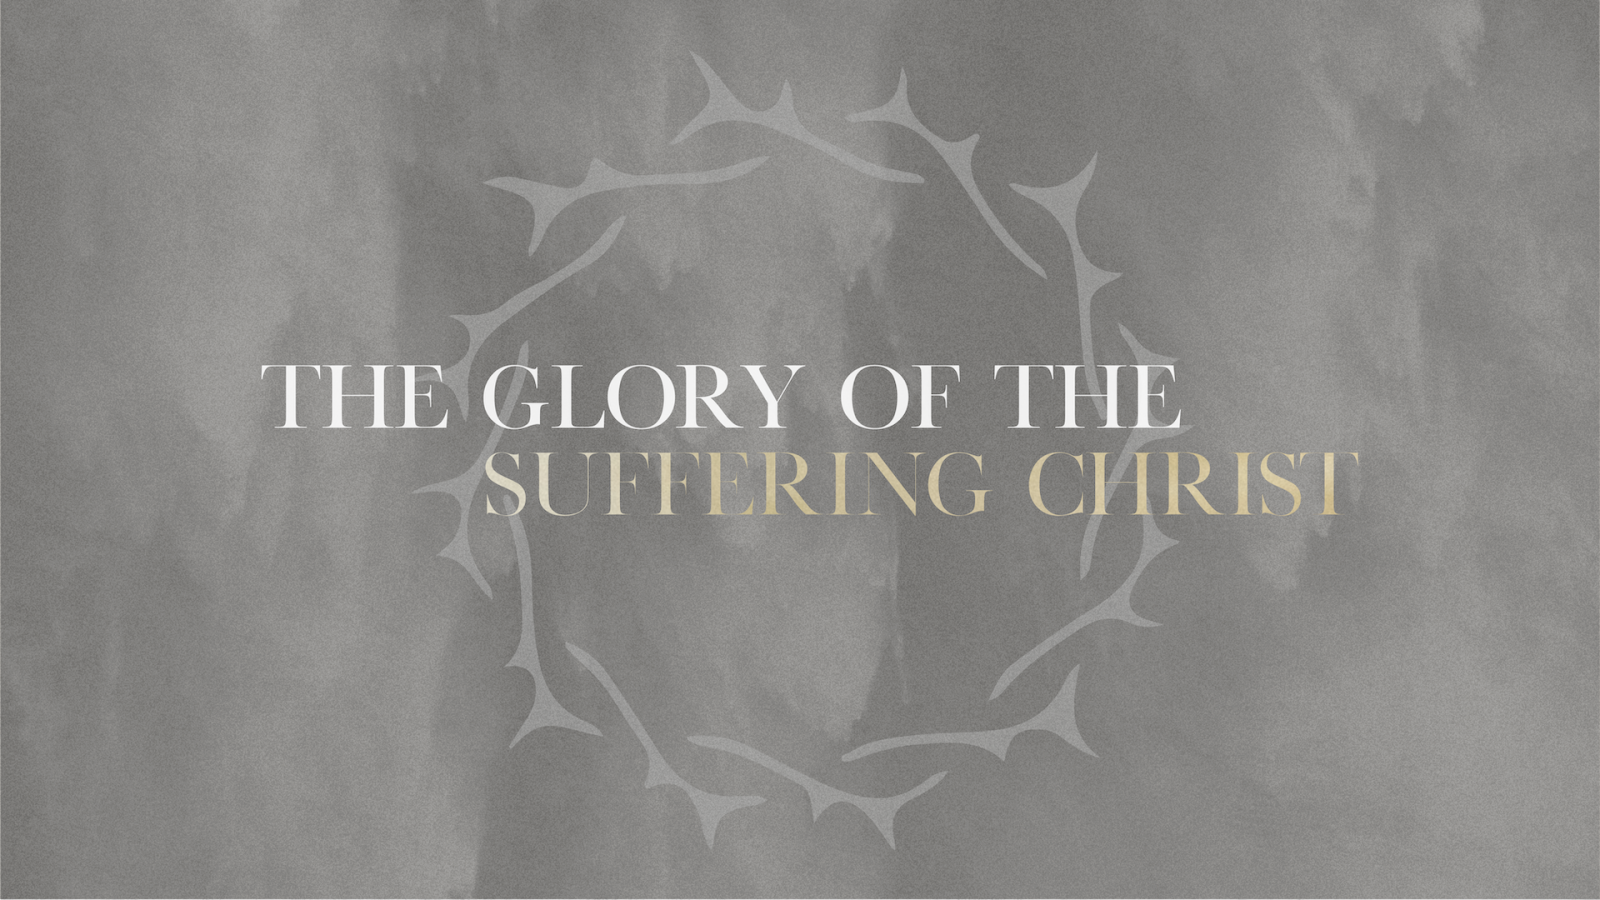 The Glory of the Suffering Christ